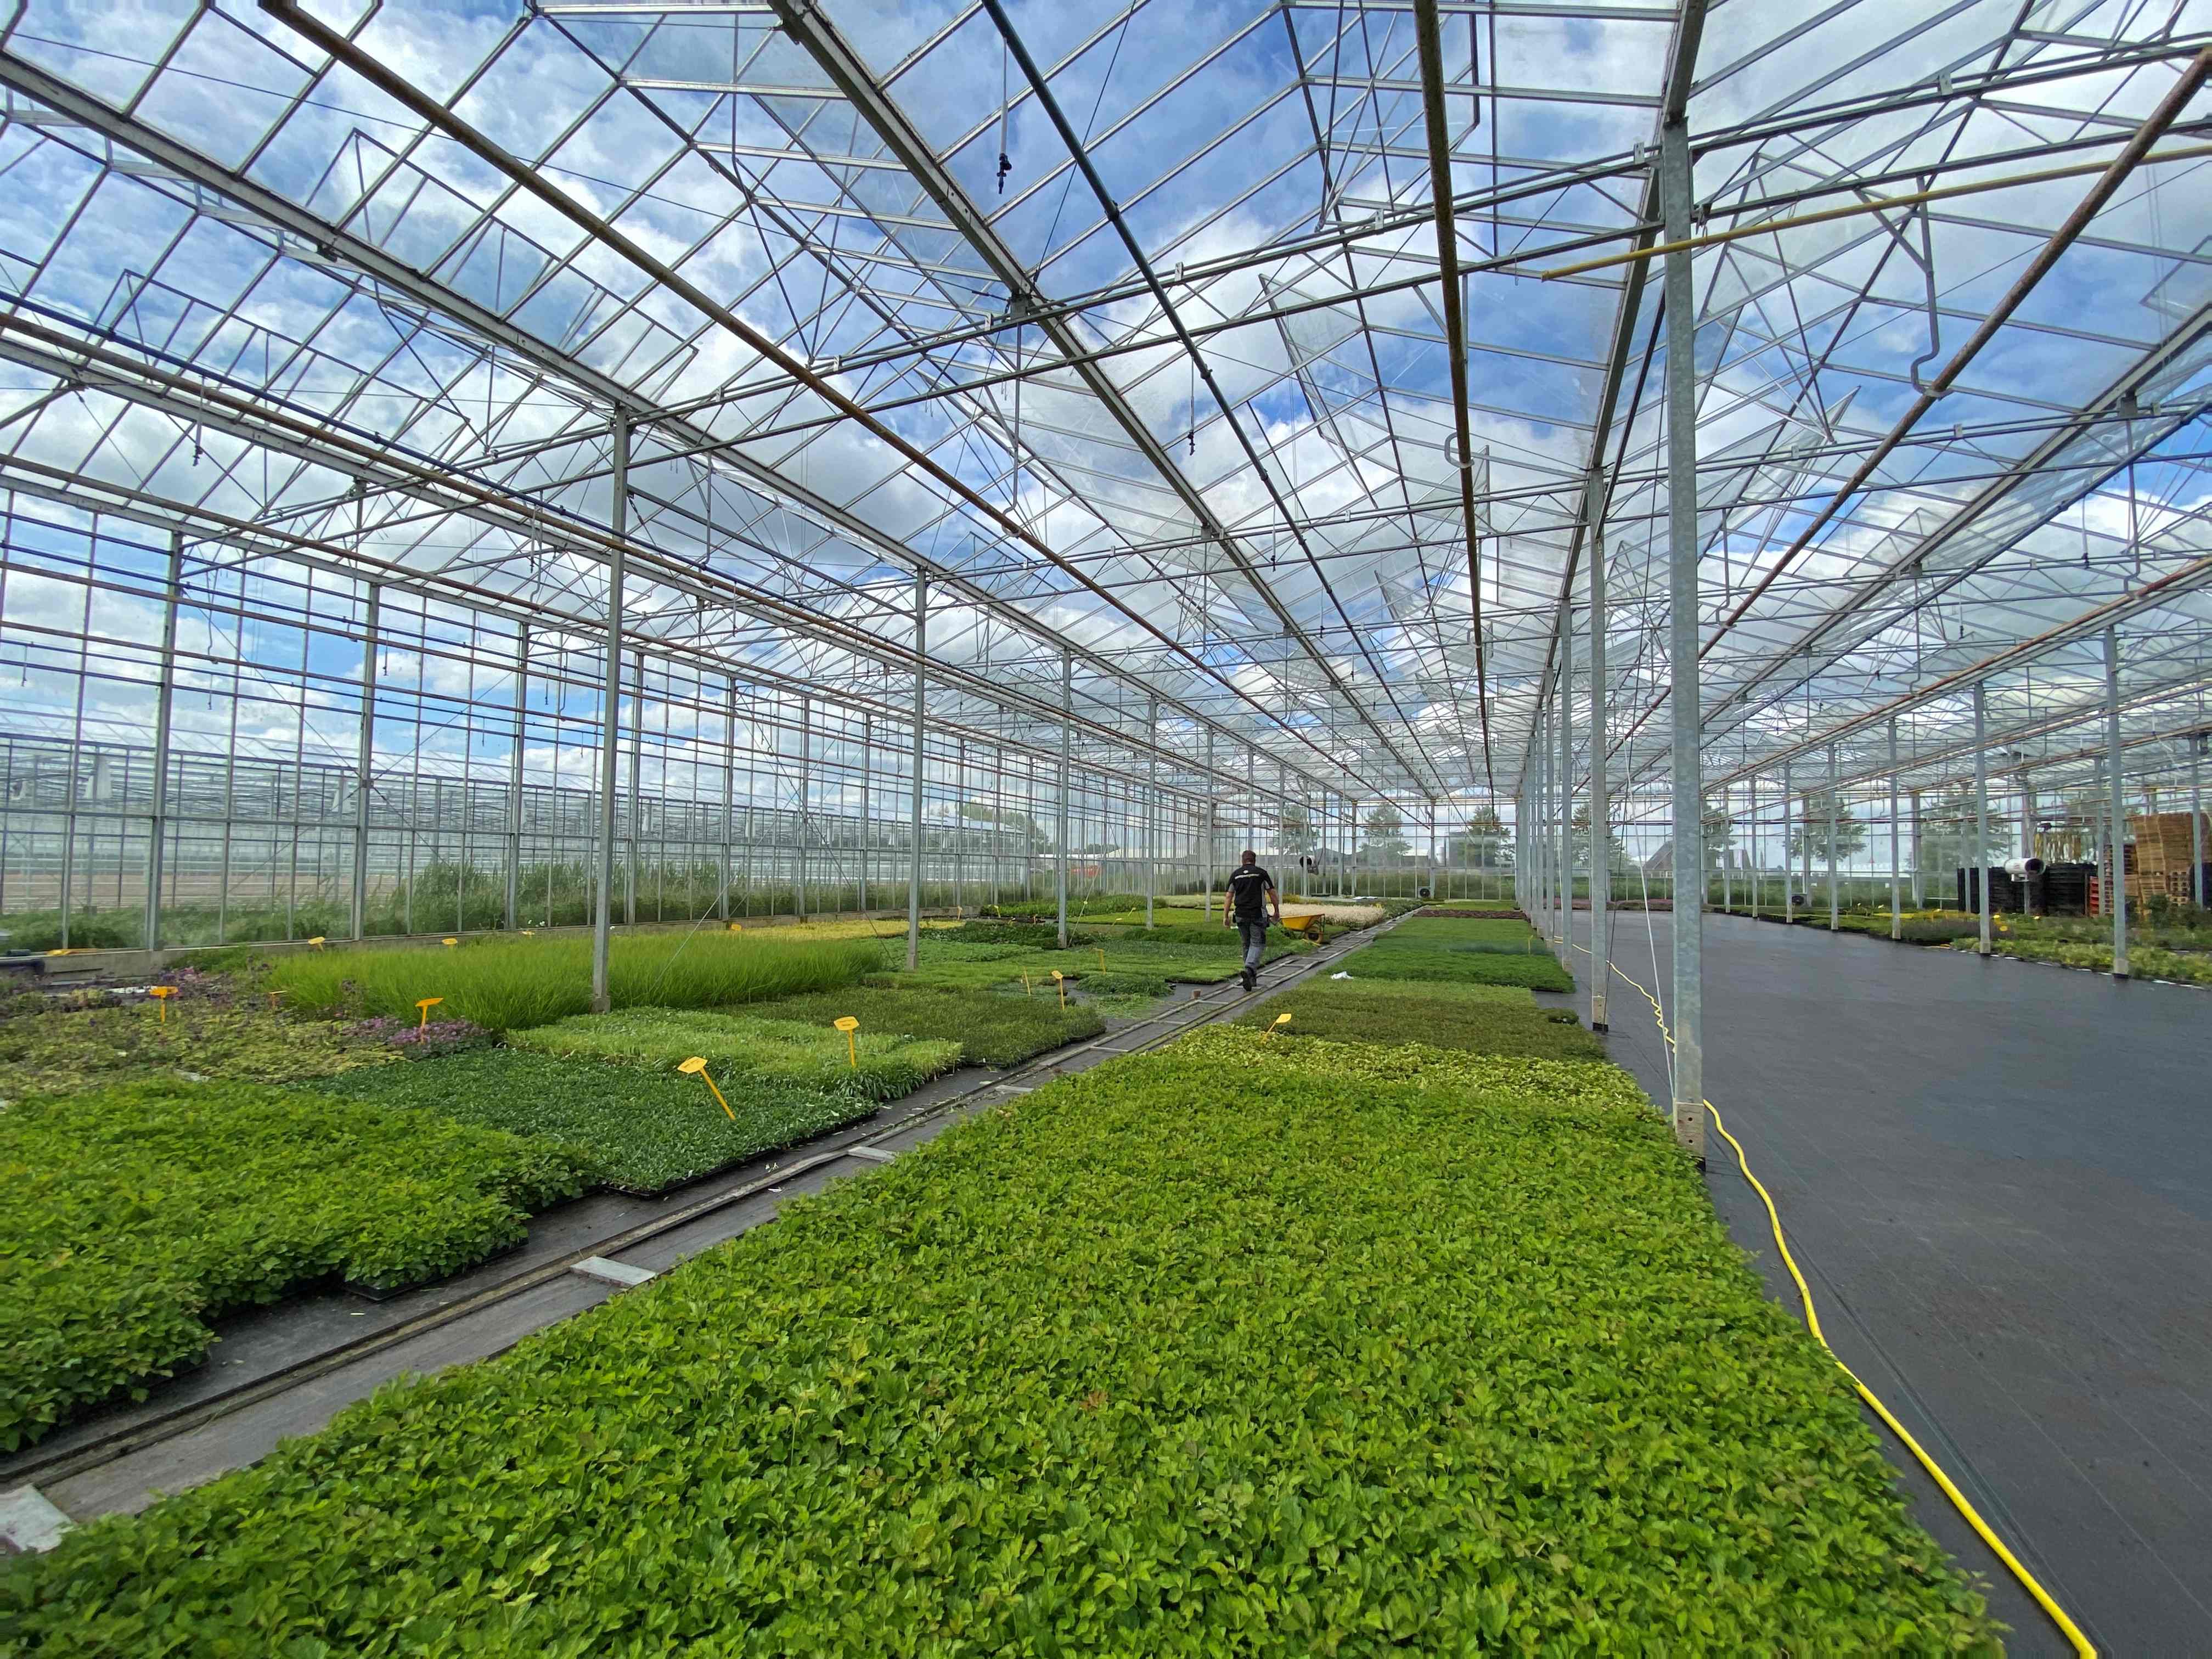 Sempergreen moved to a bigger glasshouse in Harmelen, the Netherlands